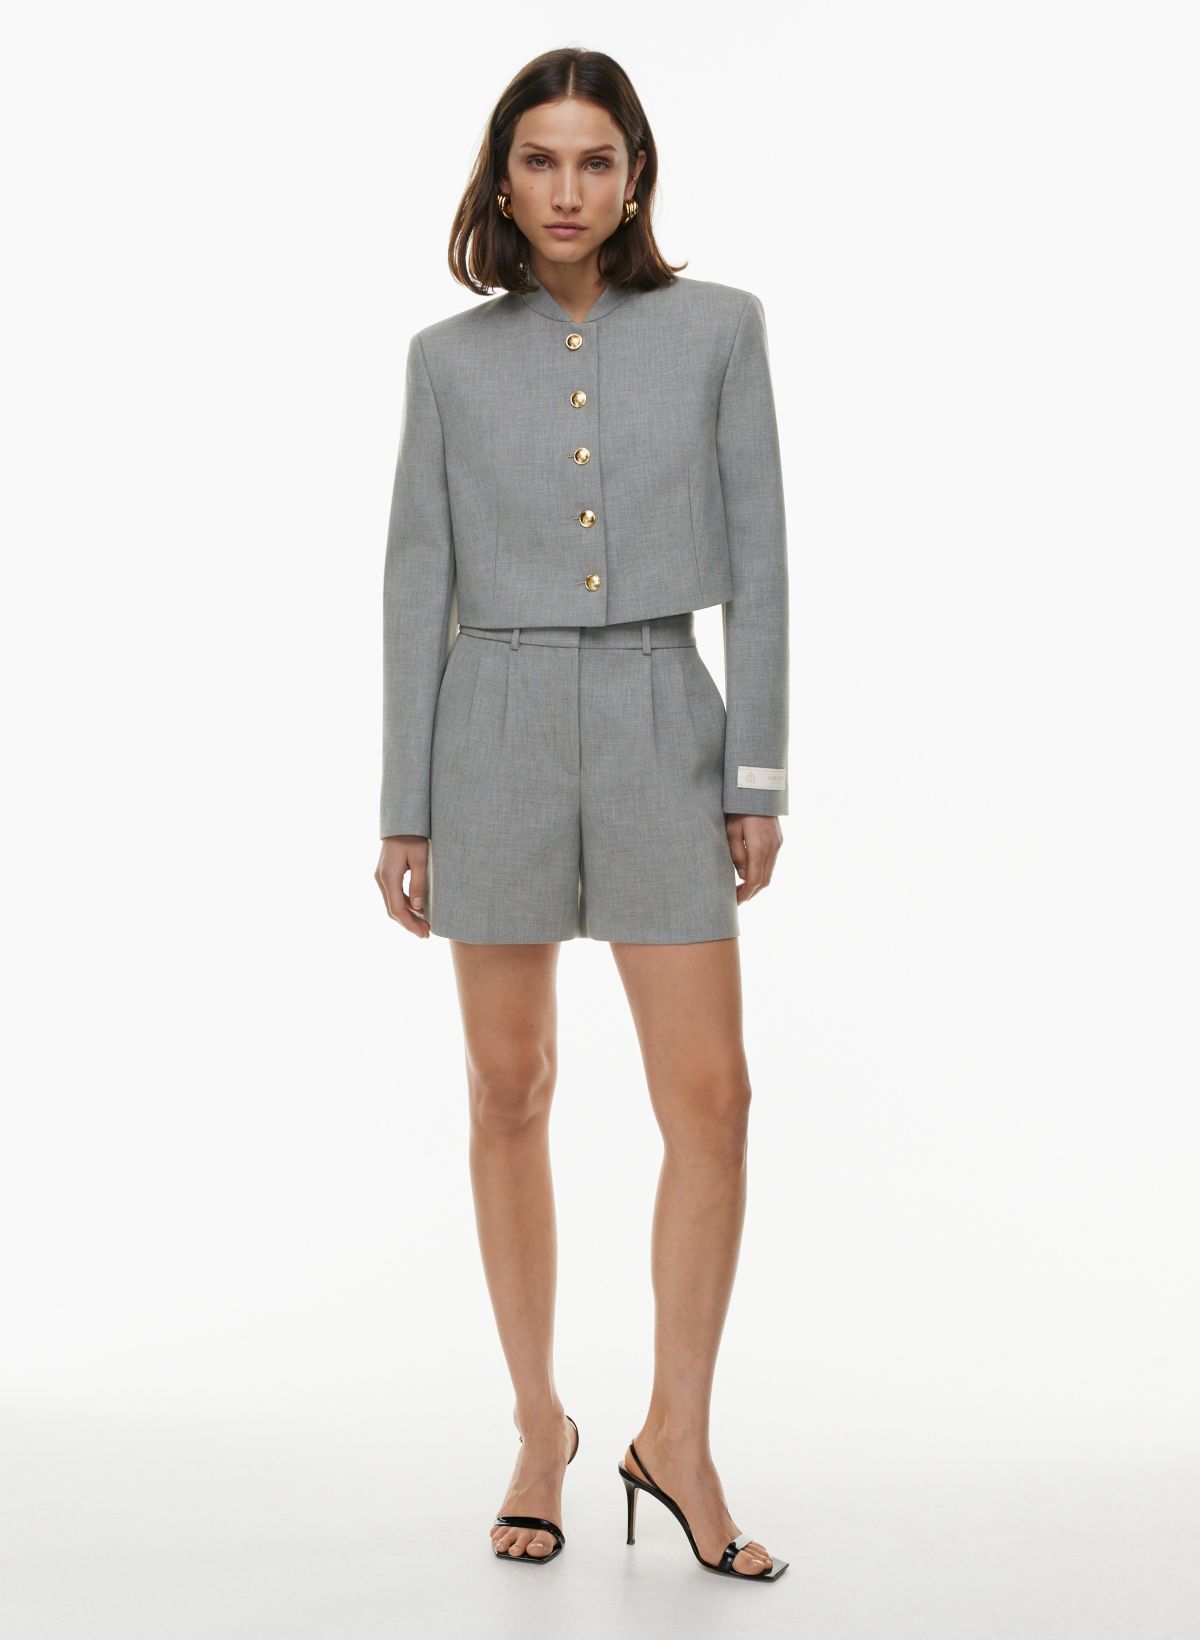 Babaton Courtship Jacket Softly structured classic-fit button-up jacket